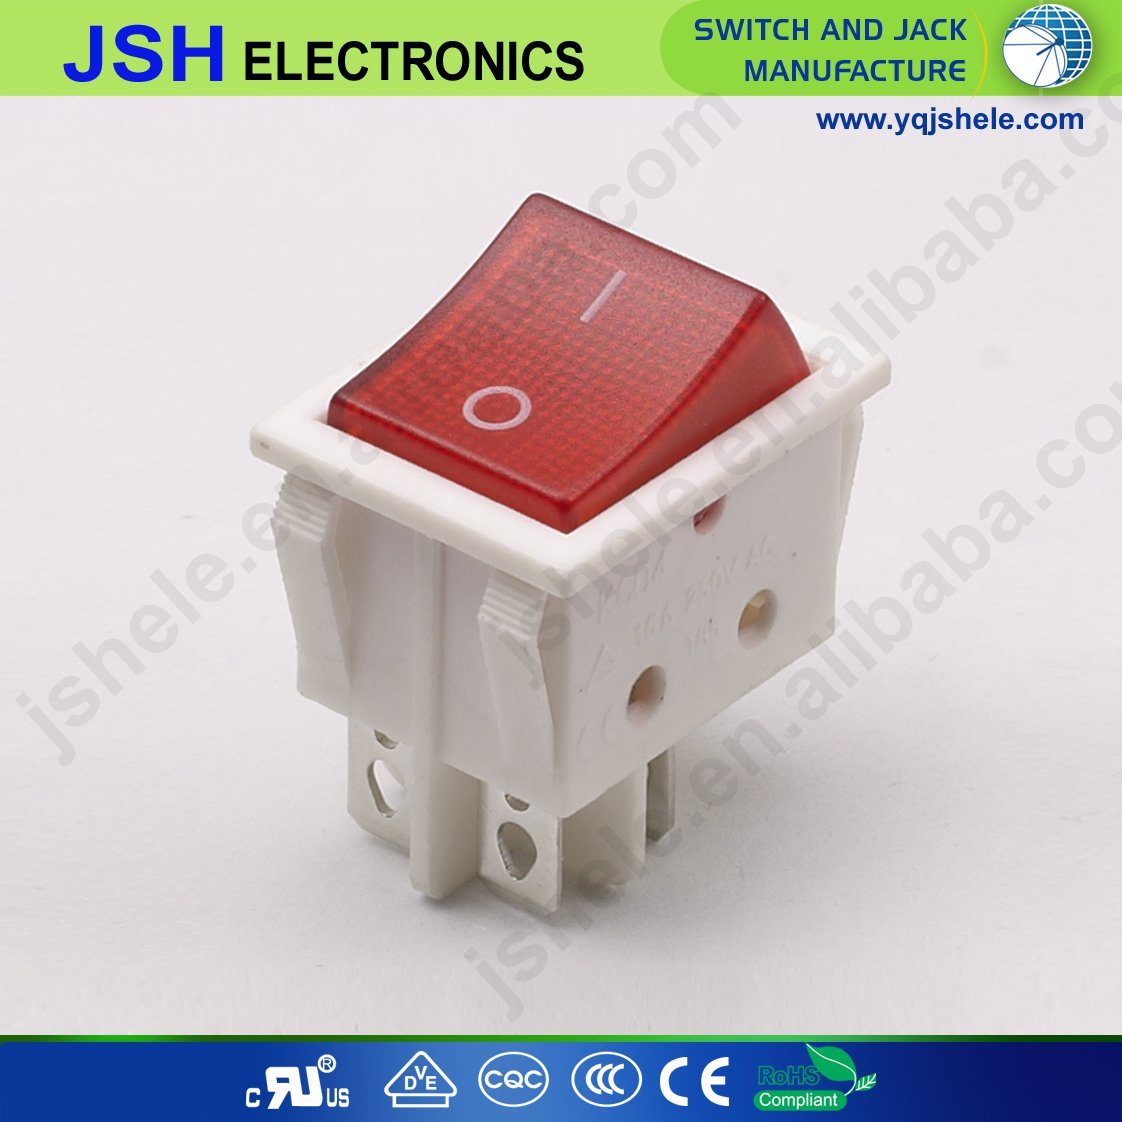 Waterproof Rocker Switch with Red Light 4pin From China Supplier